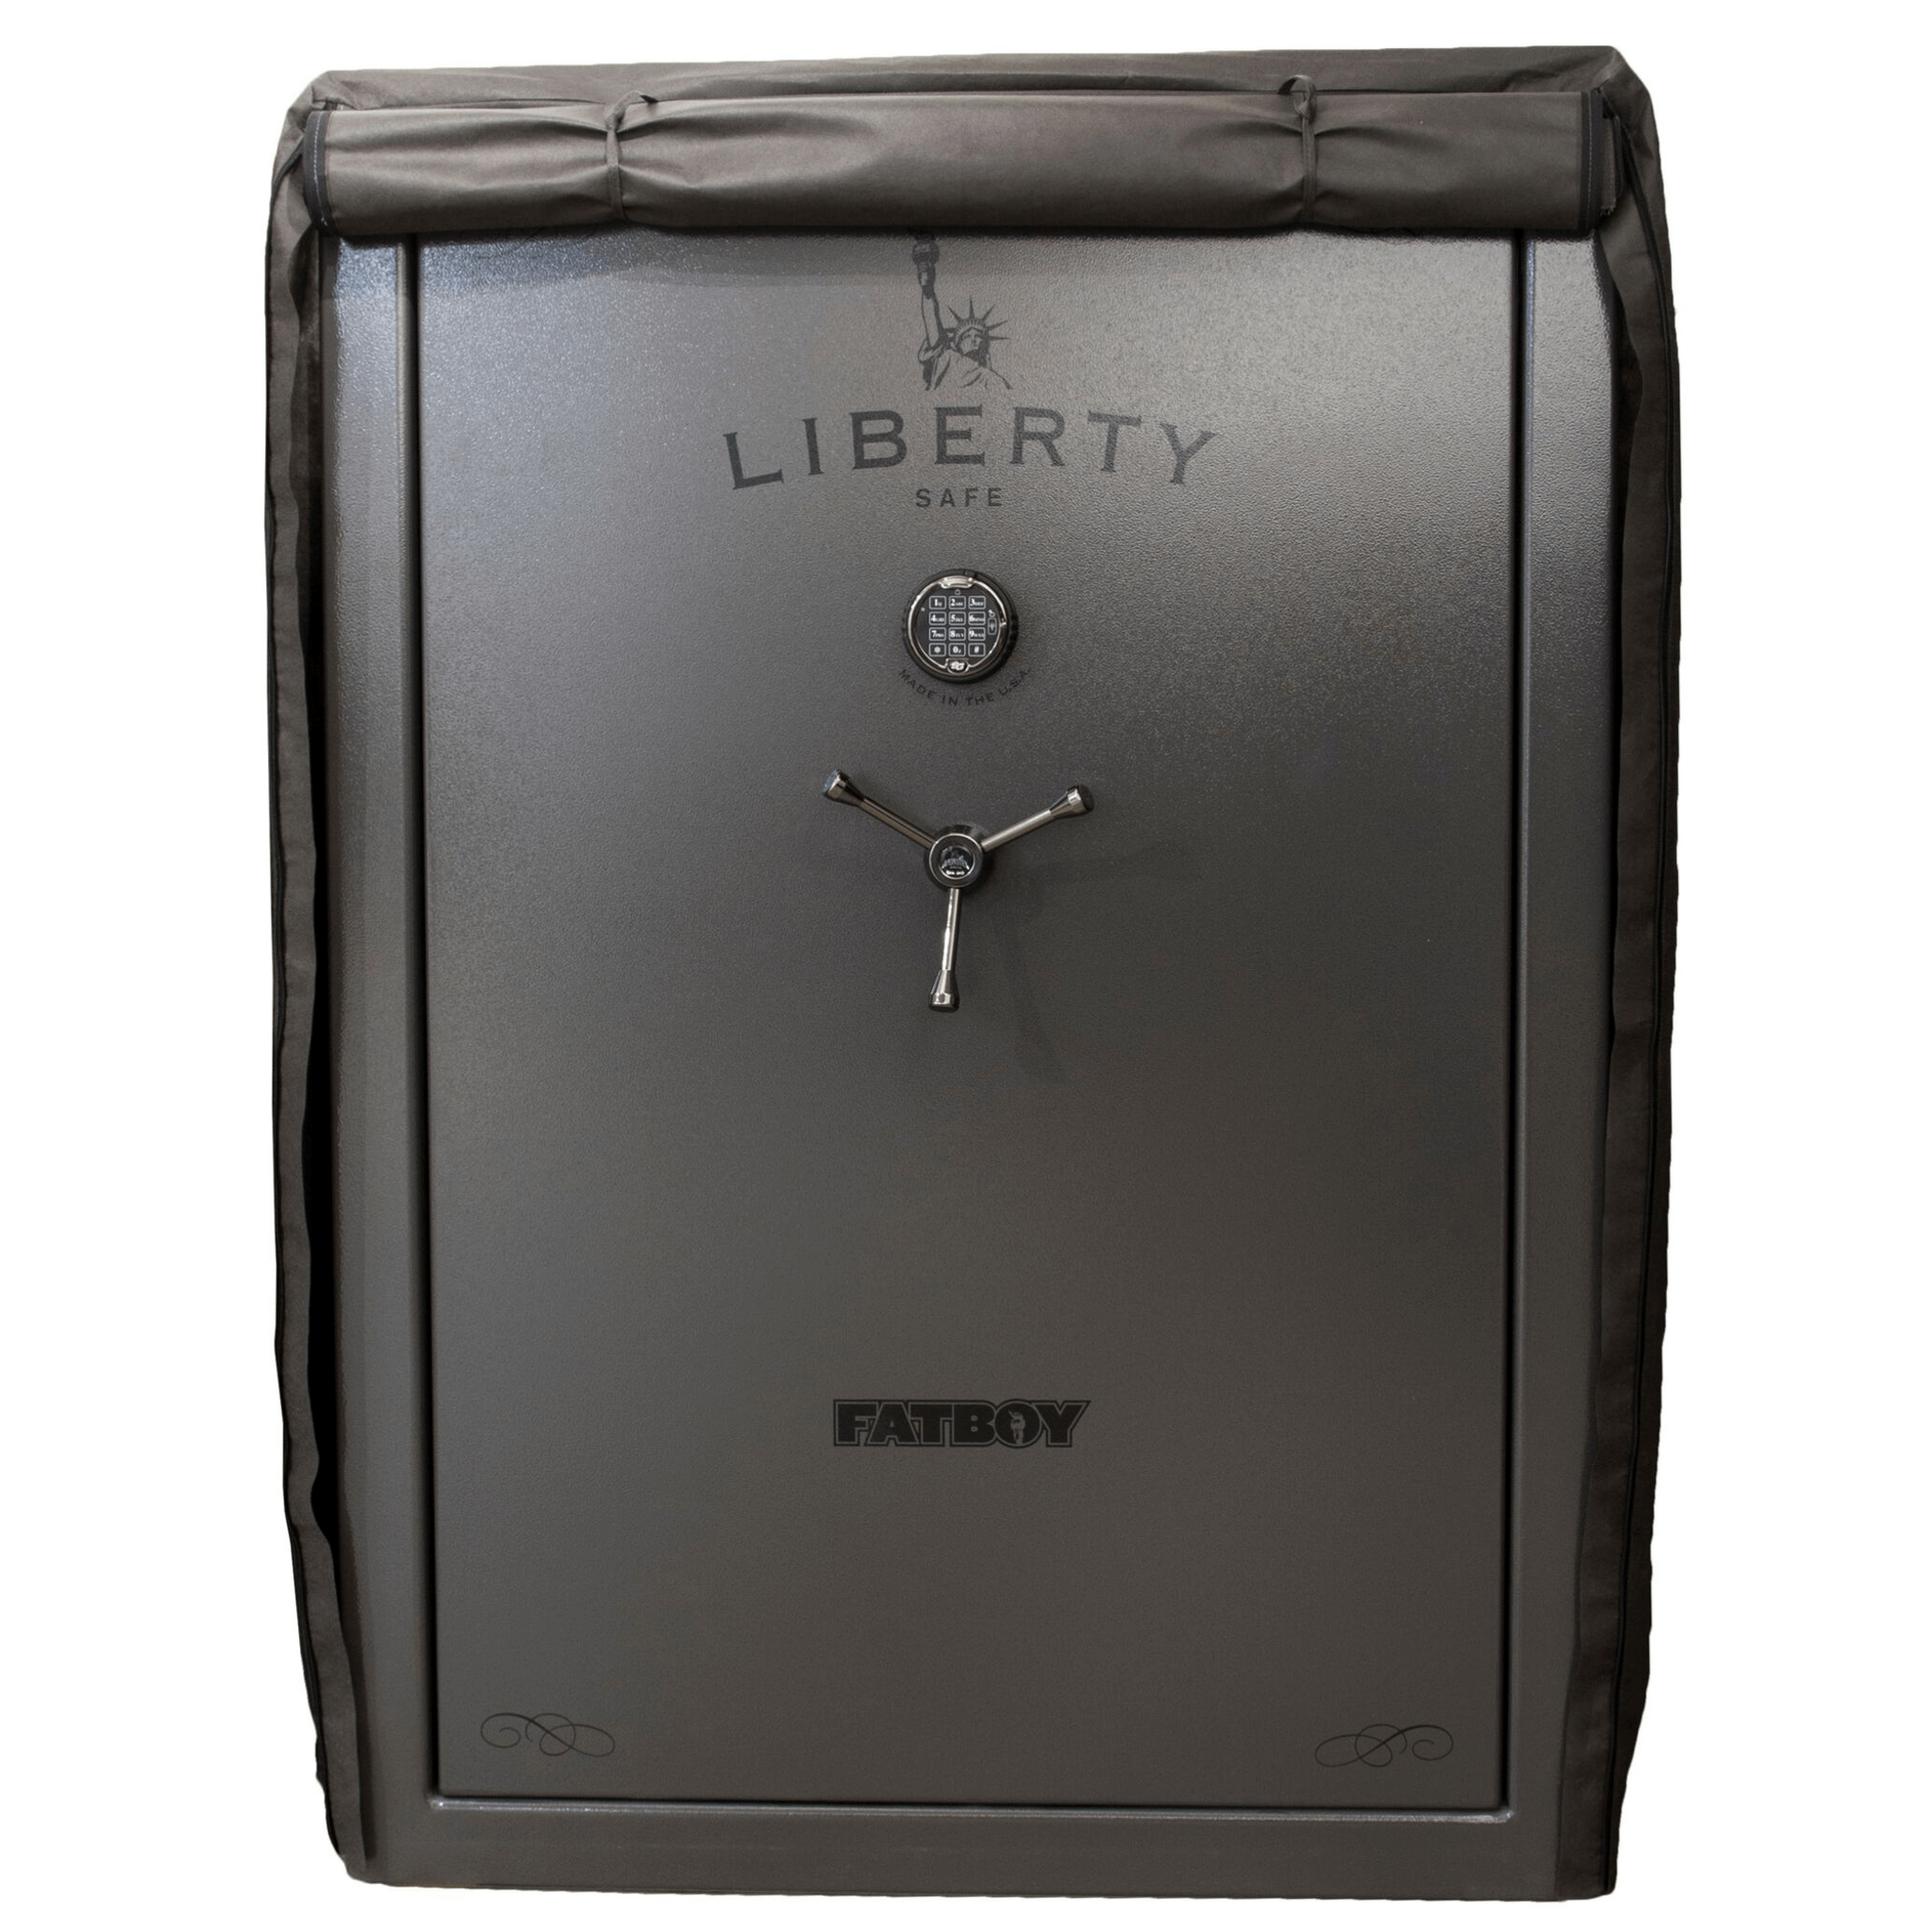 Accessory - Security - Safe Cover - 64 size safes, photo 1